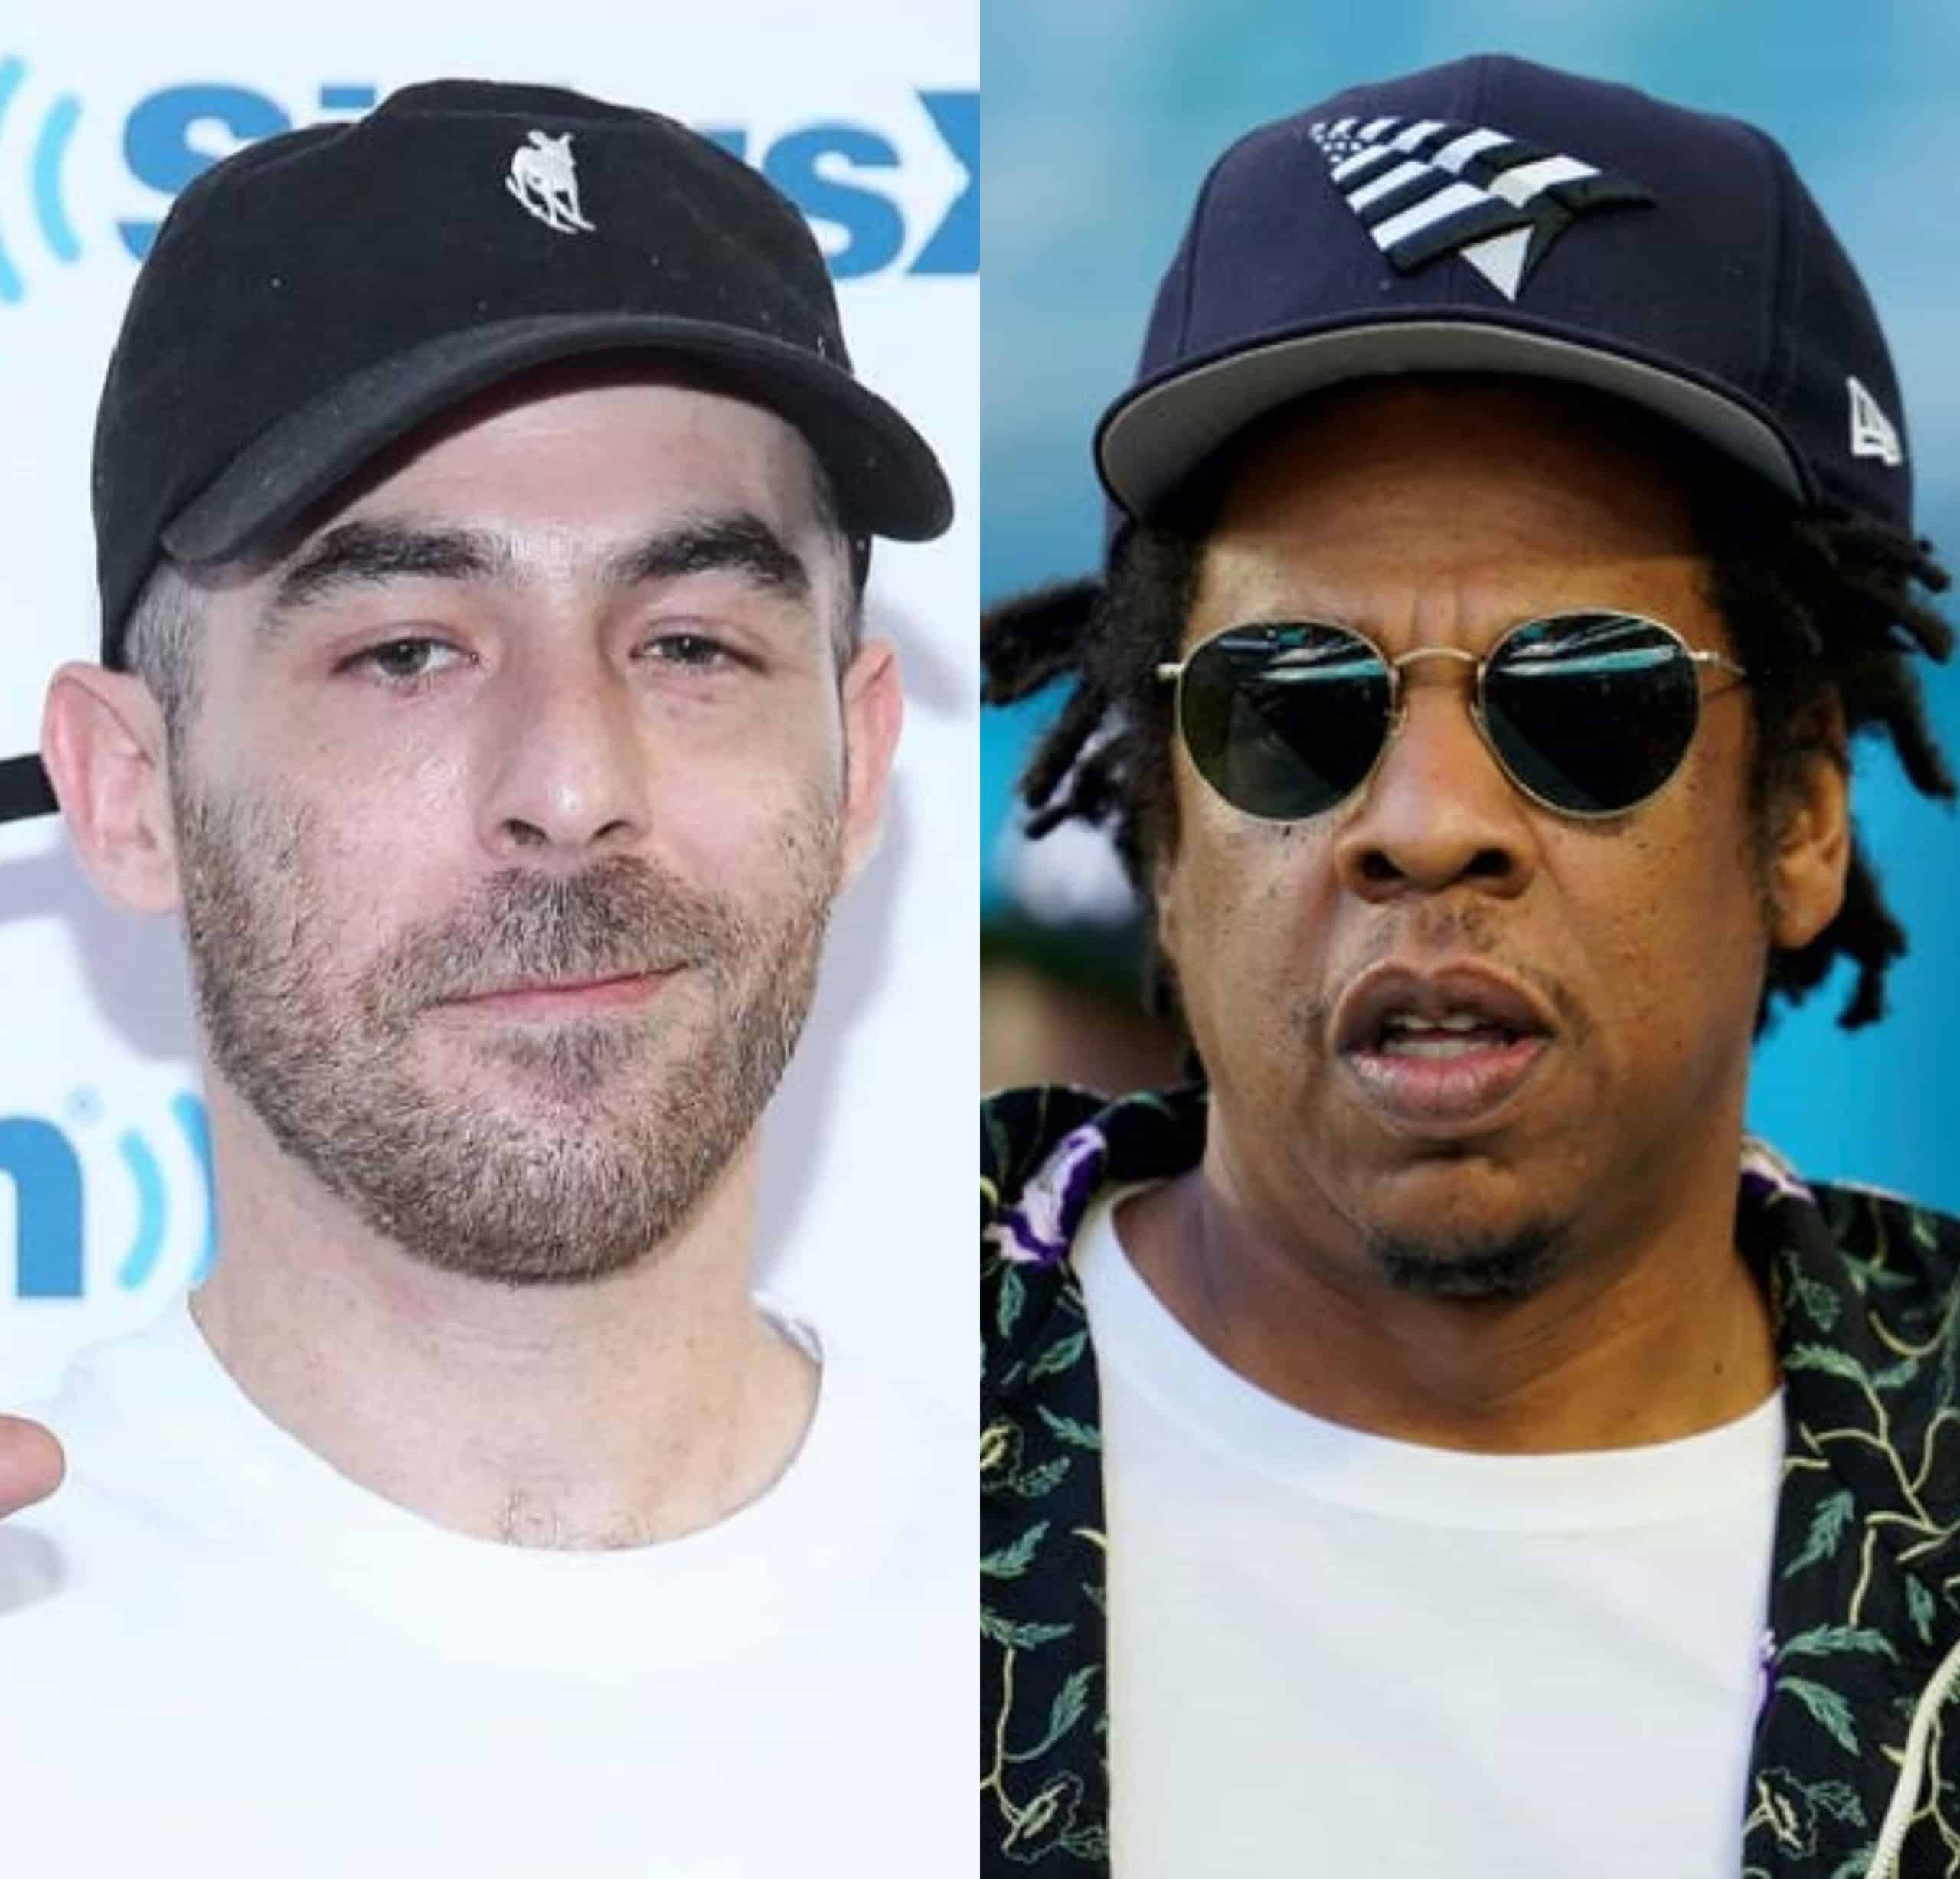 The Alchemist Says A Joint Project With JAY-Z is His Dream Collab